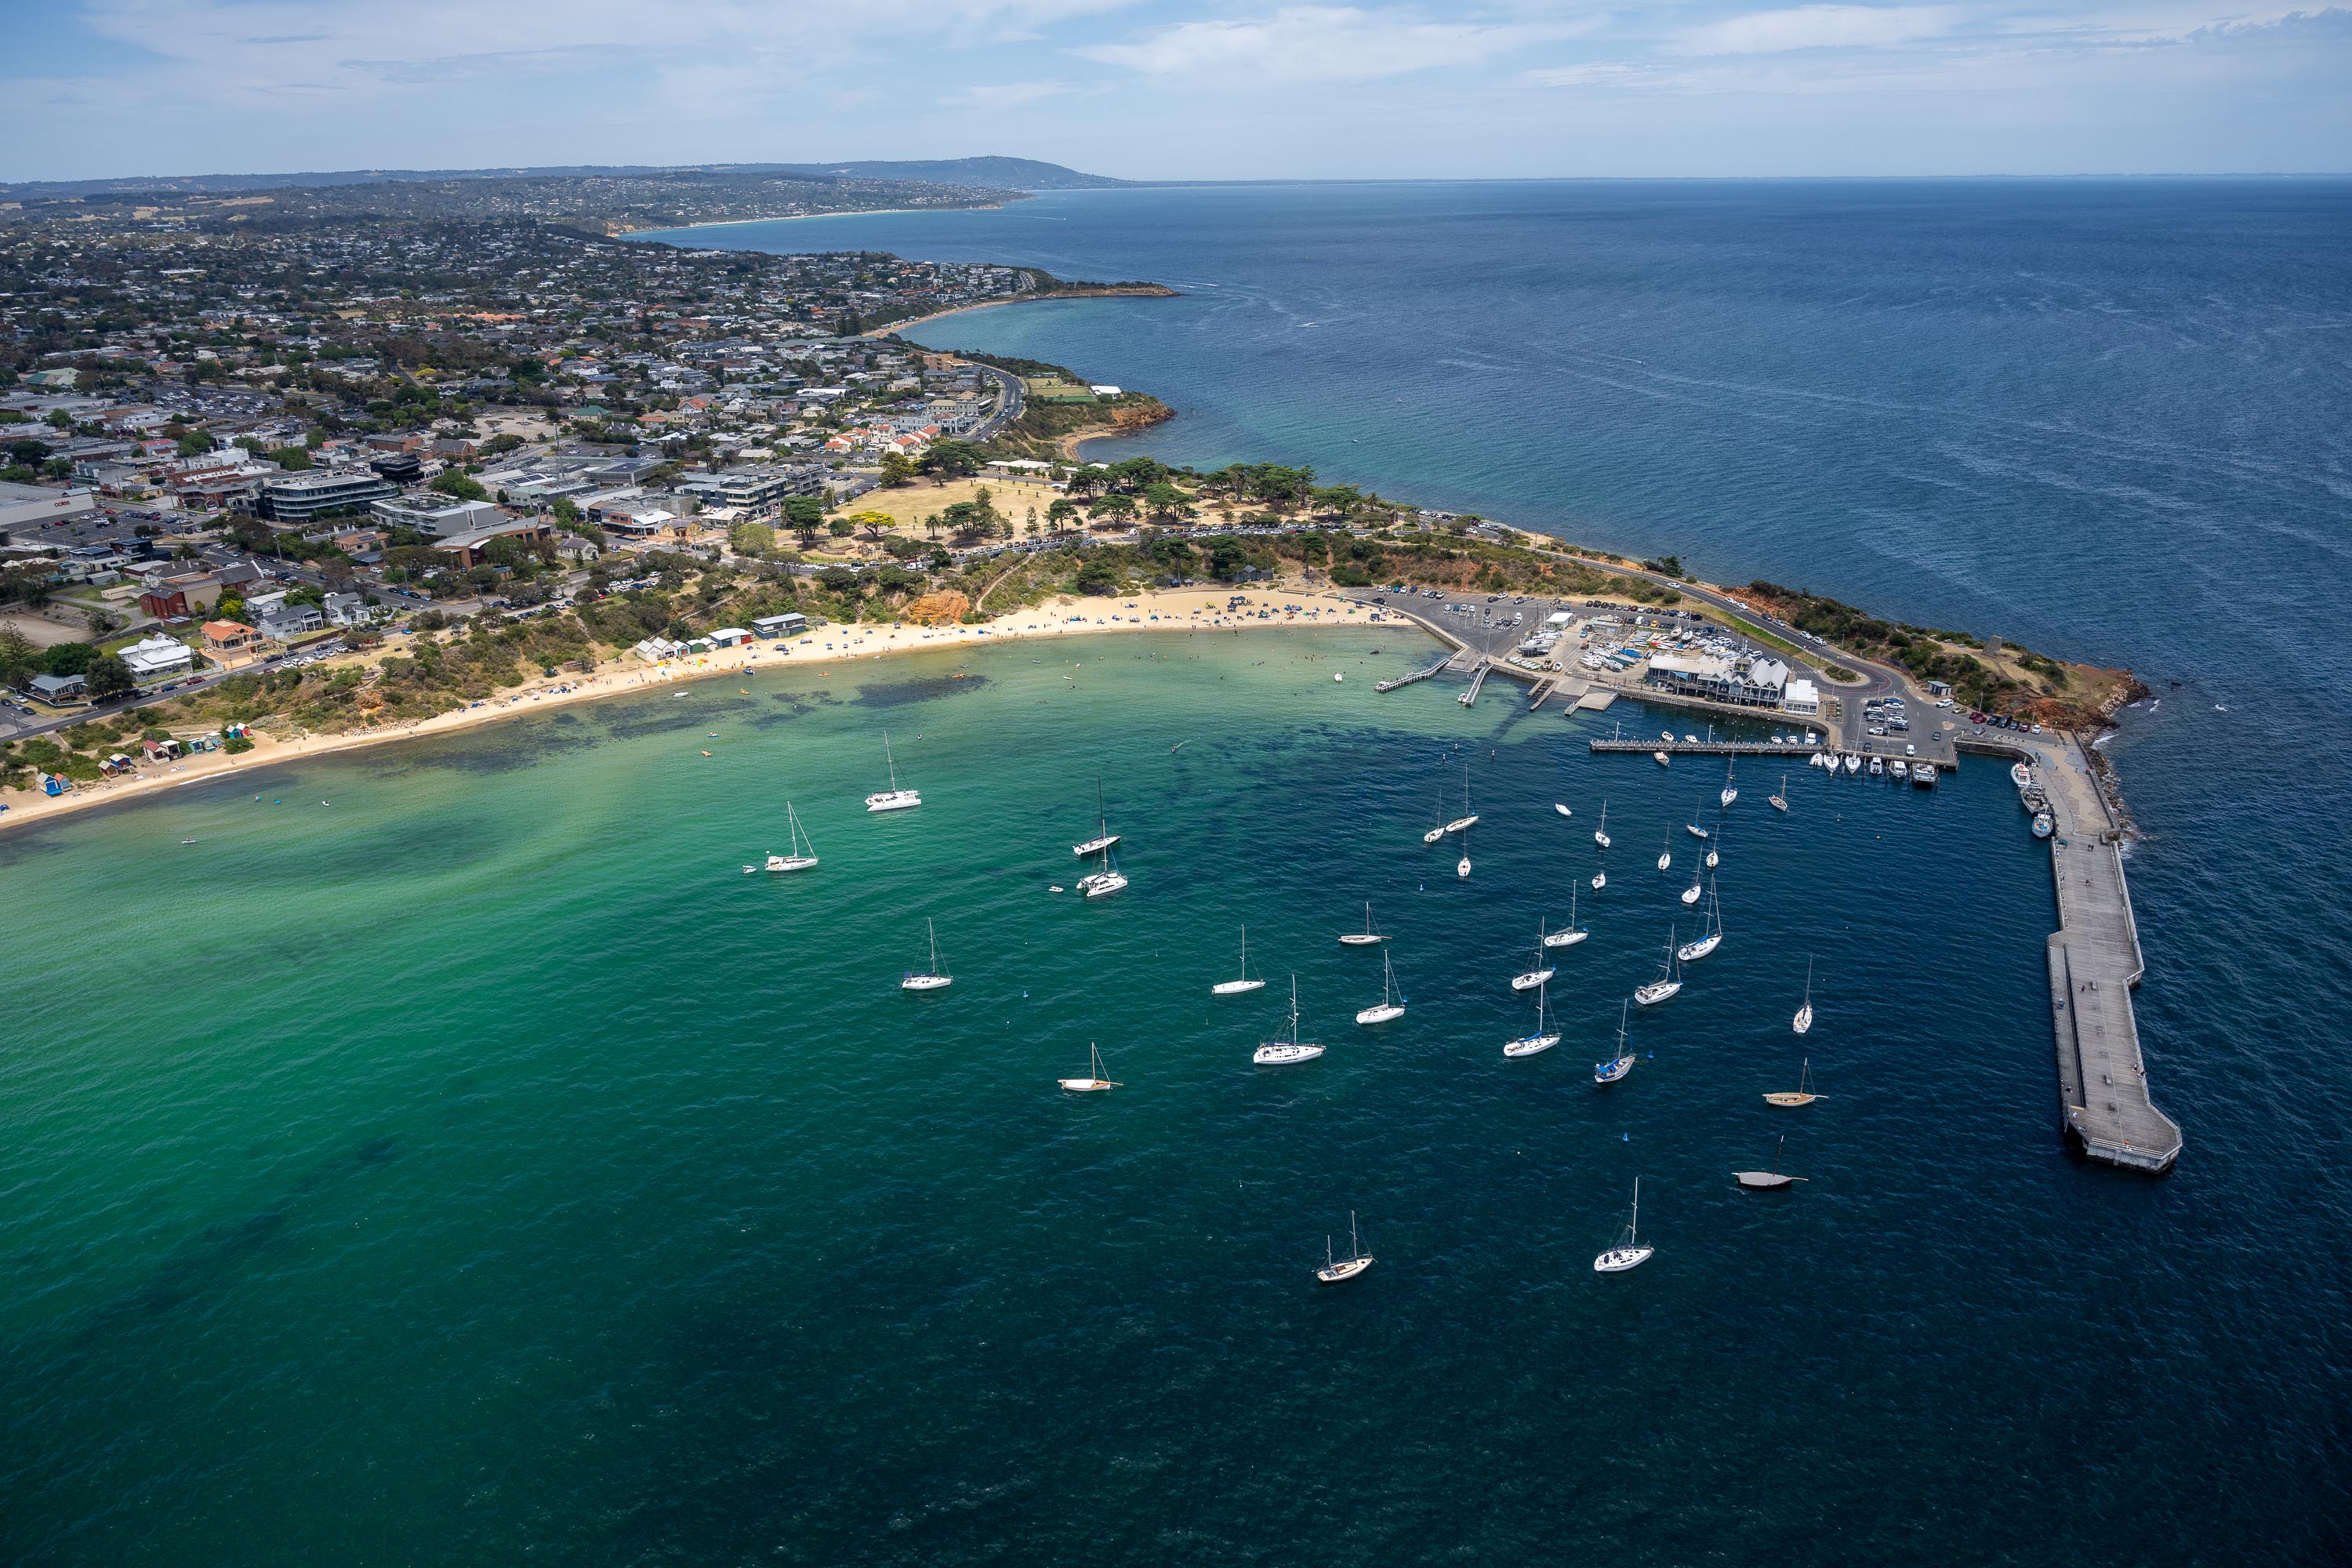 Mornington Harbour from above